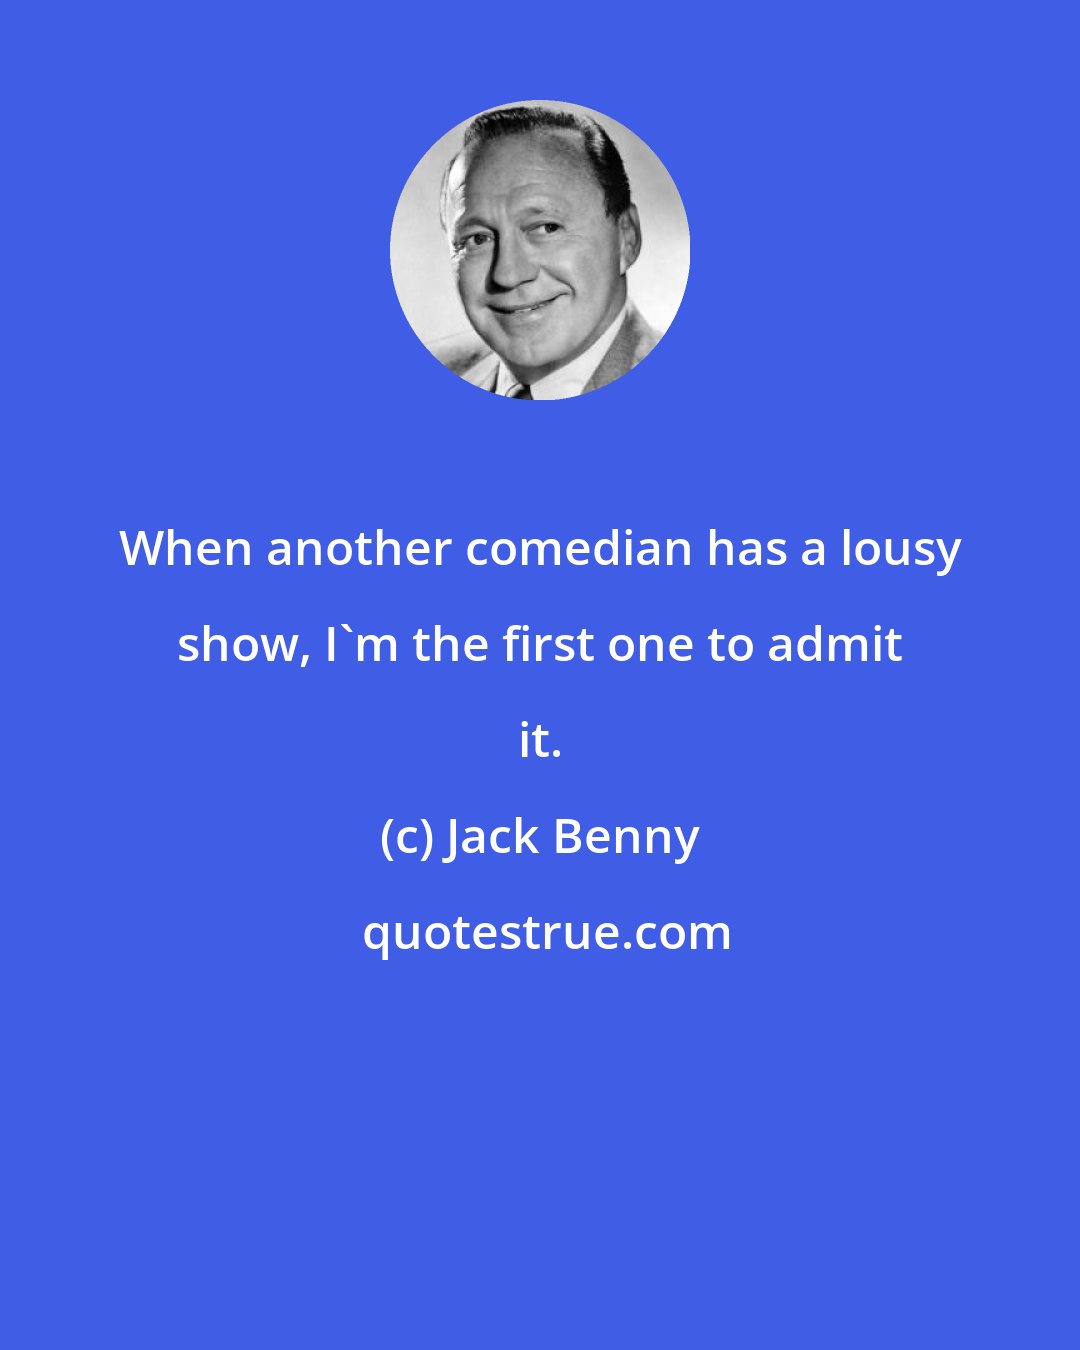 Jack Benny: When another comedian has a lousy show, I'm the first one to admit it.